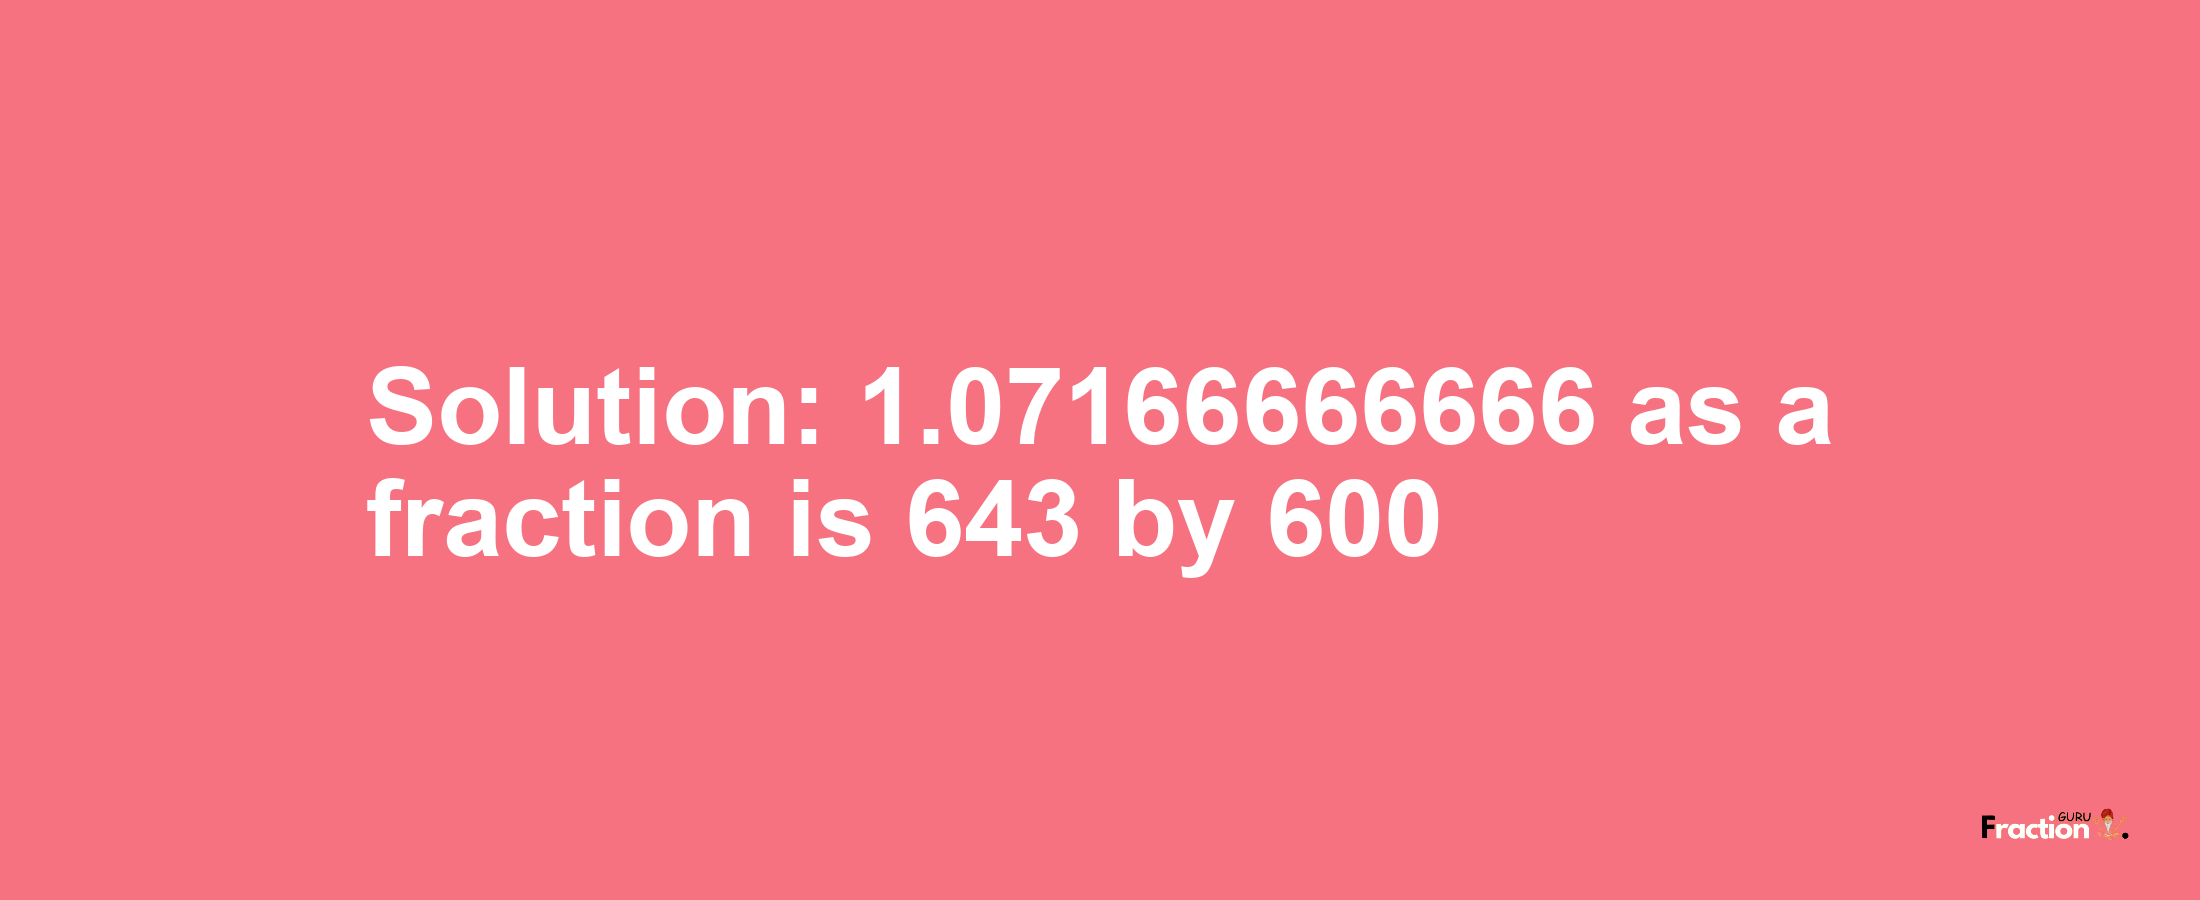 Solution:1.07166666666 as a fraction is 643/600